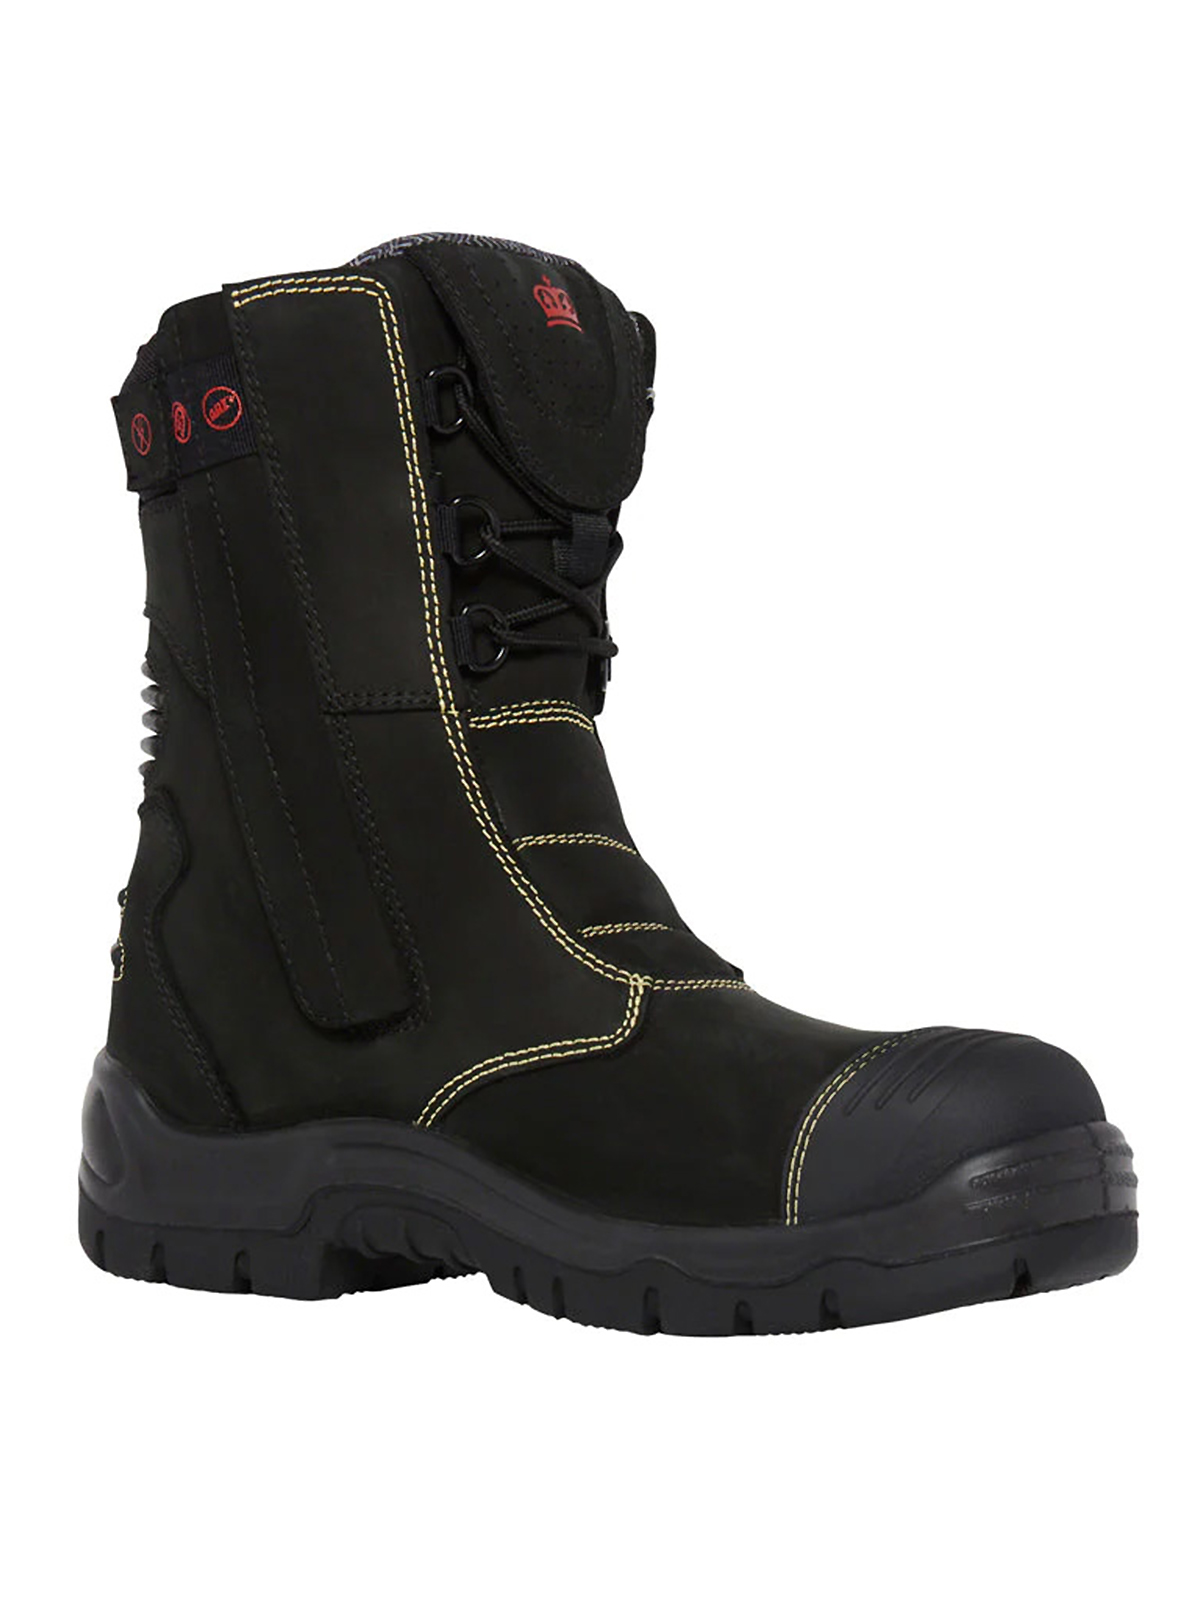 King Gee Bennu Rigger Zip Safety Boot K27174 - The Workers Shop